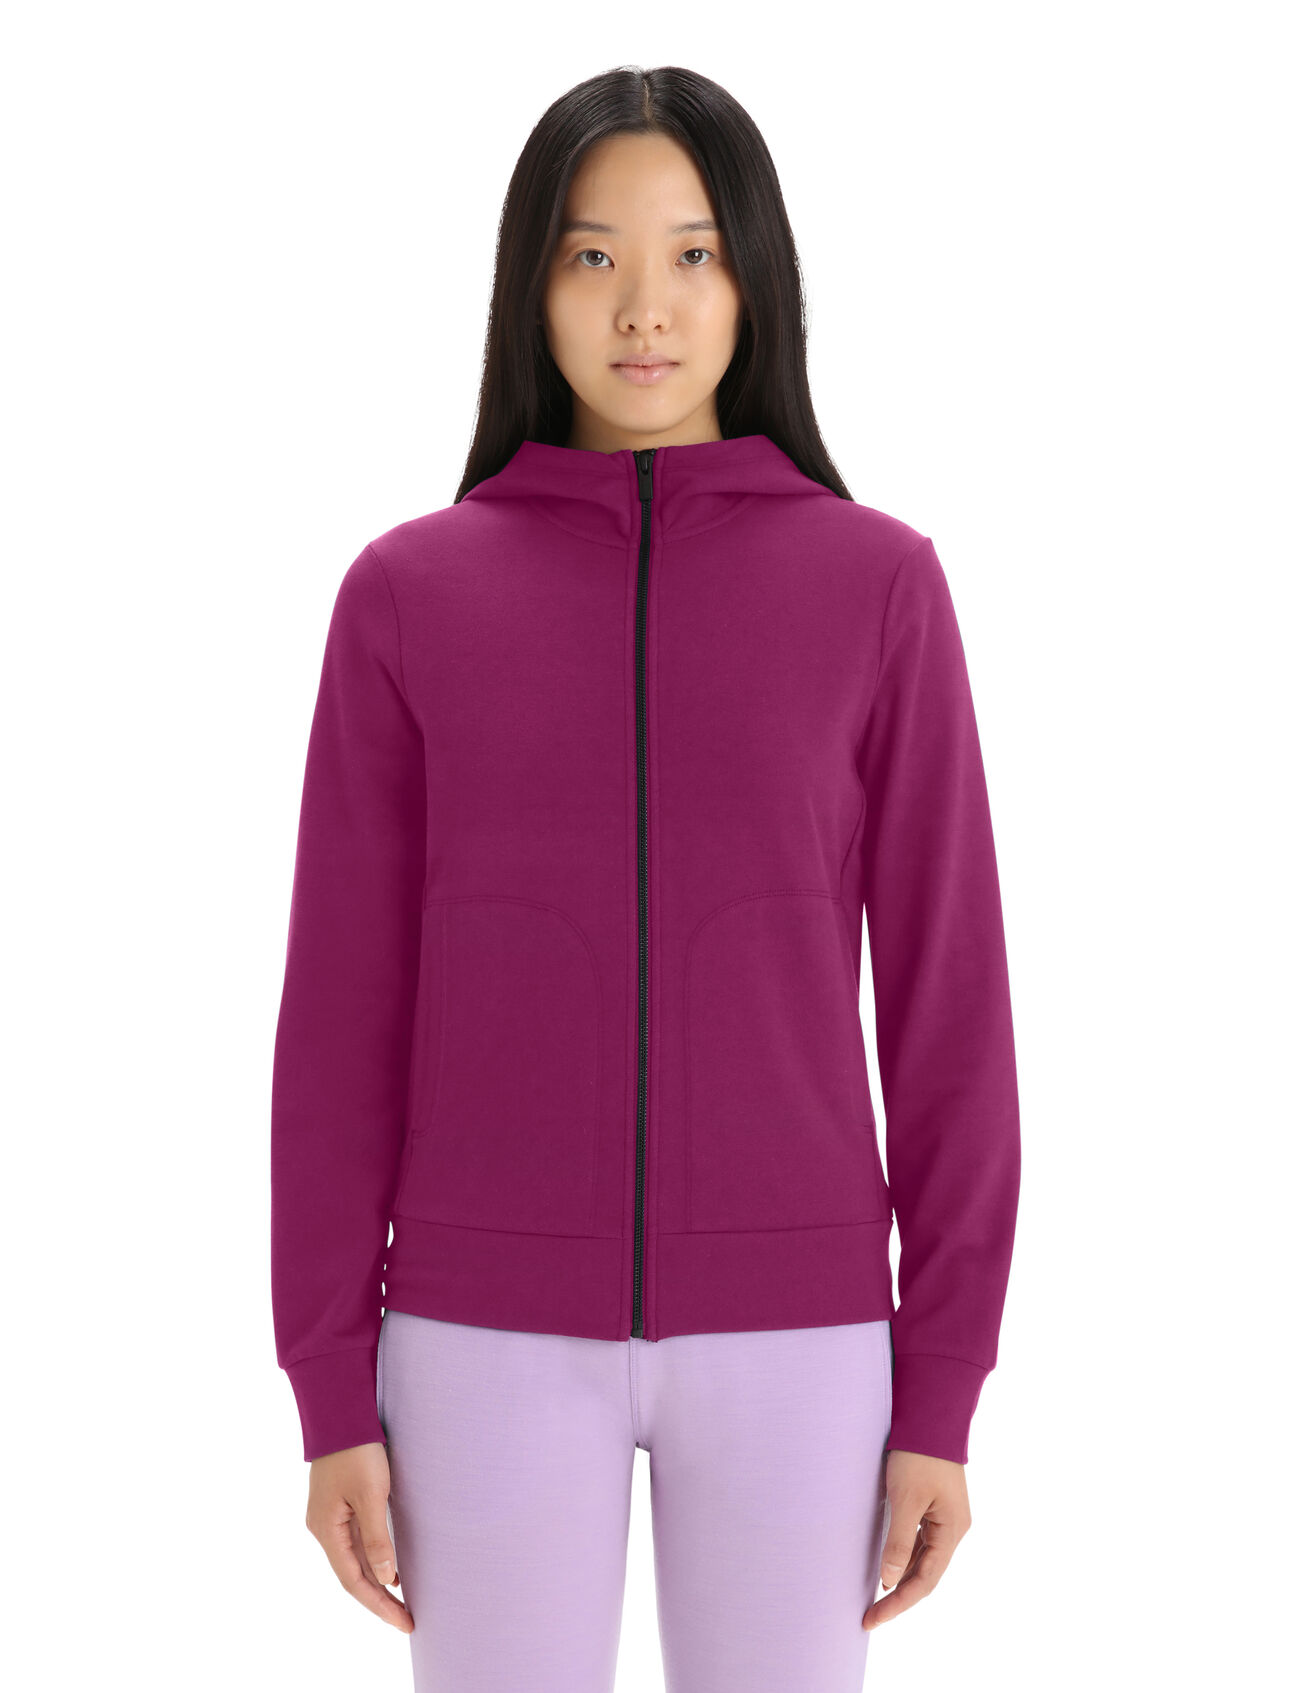 Womens Merino Central Classic Long Sleeve Zip Hoodie A comfy, classic and stylish everyday hooded sweatshirt that blends natural merino wool with organic cotton, the Central Classic Long Sleeve Zip Hoodie is durable, breathable and incredibly versatile.